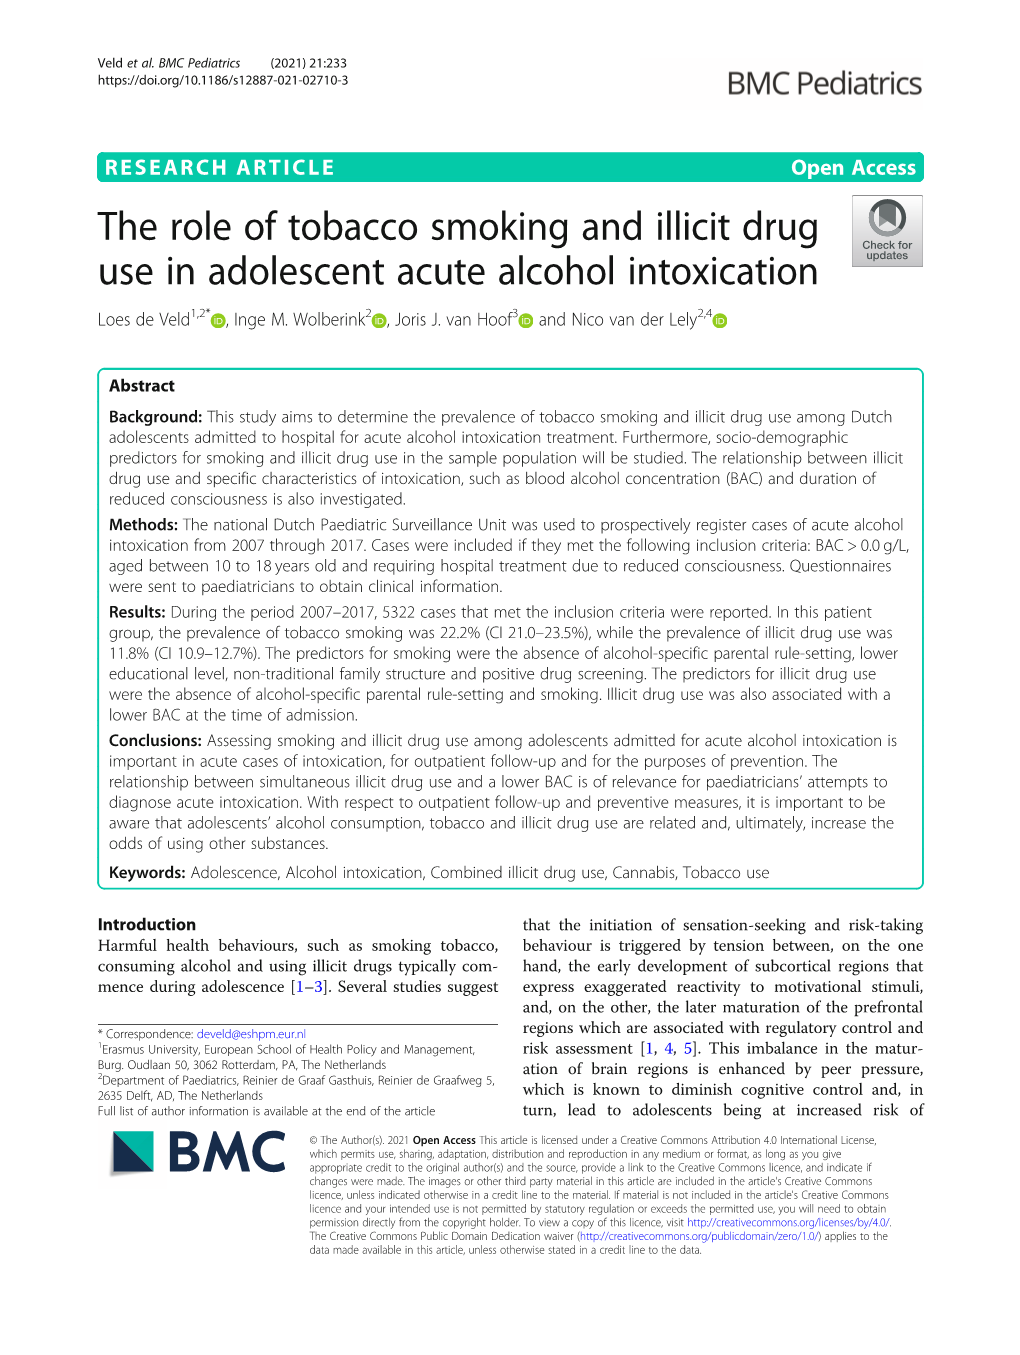 The Role of Tobacco Smoking and Illicit Drug Use in Adolescent Acute Alcohol Intoxication Loes De Veld1,2* , Inge M